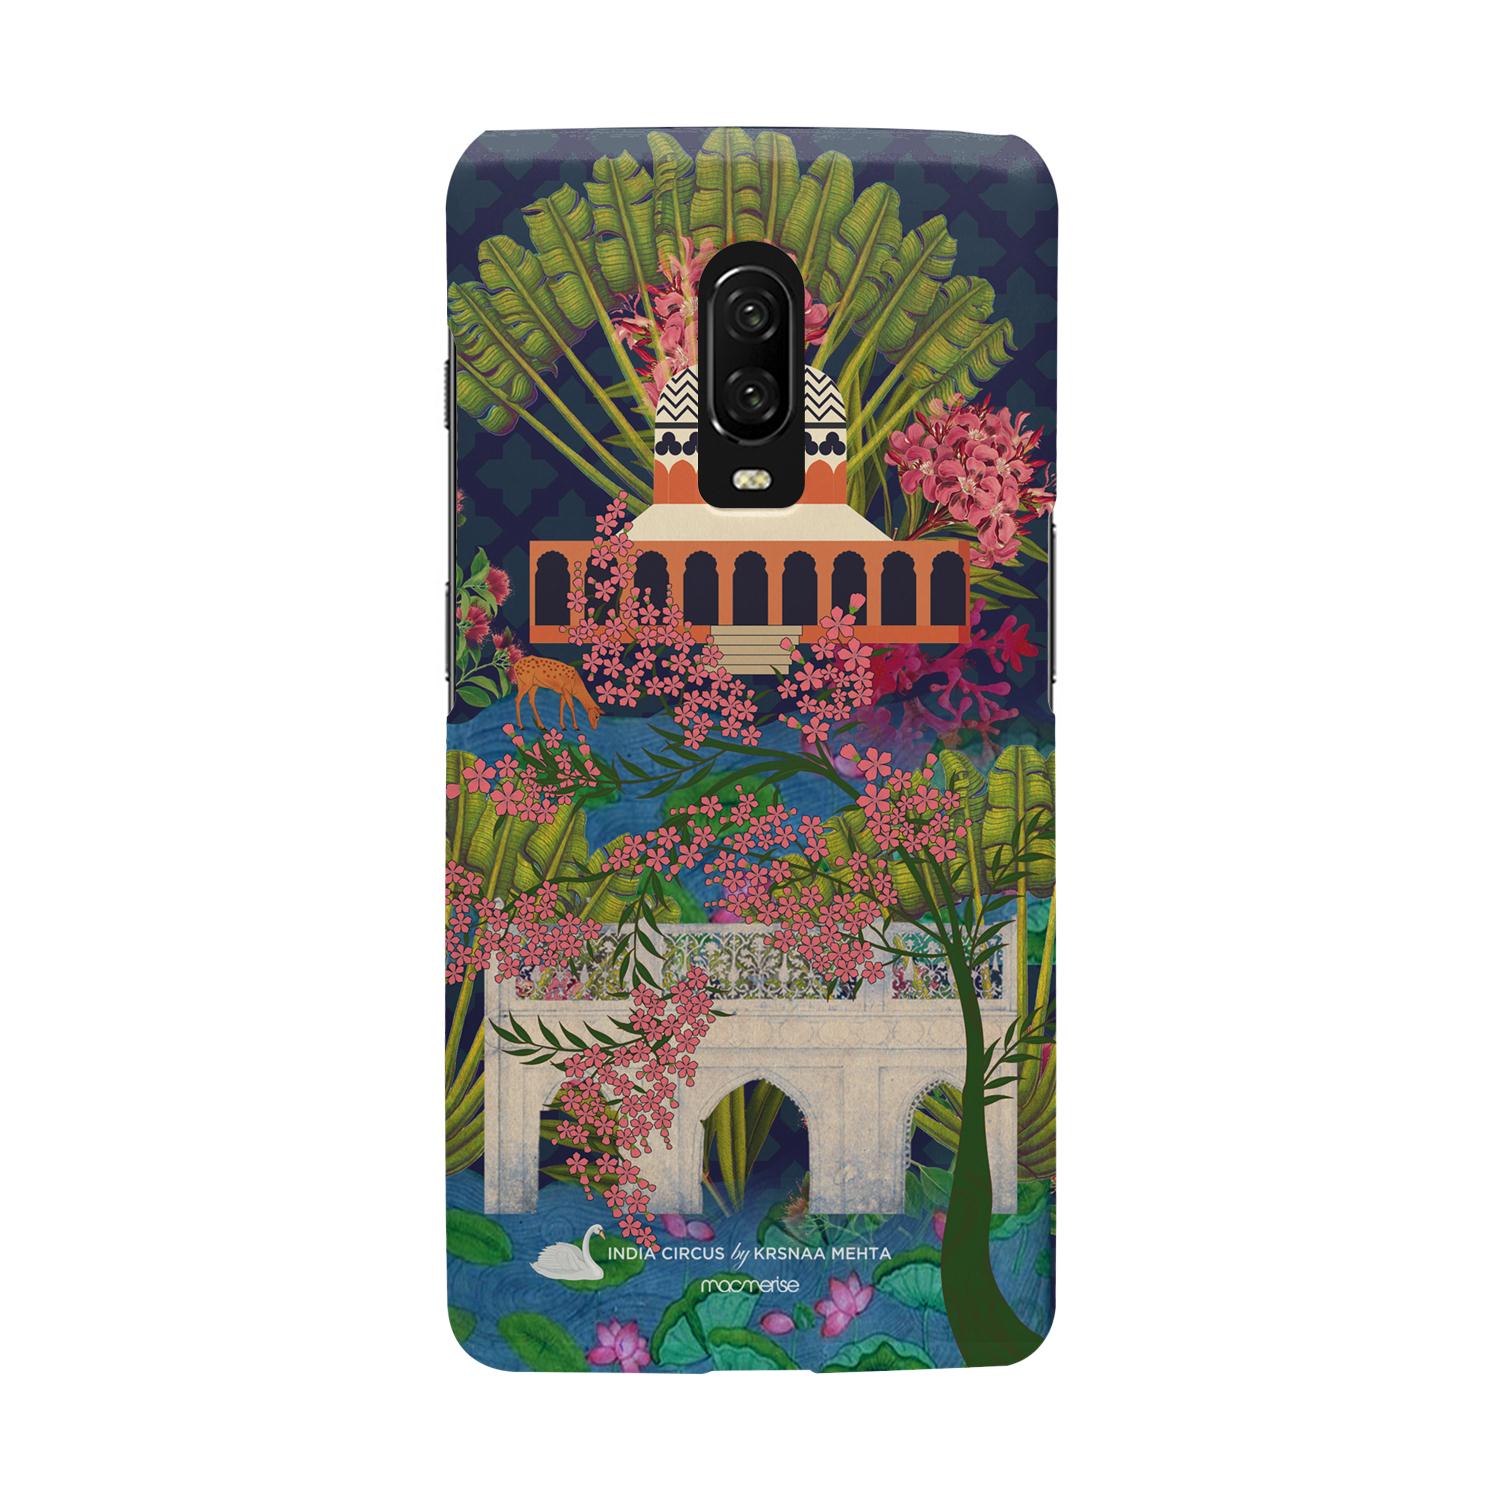 Blossoms - Sleek Phone Case for OnePlus 6T